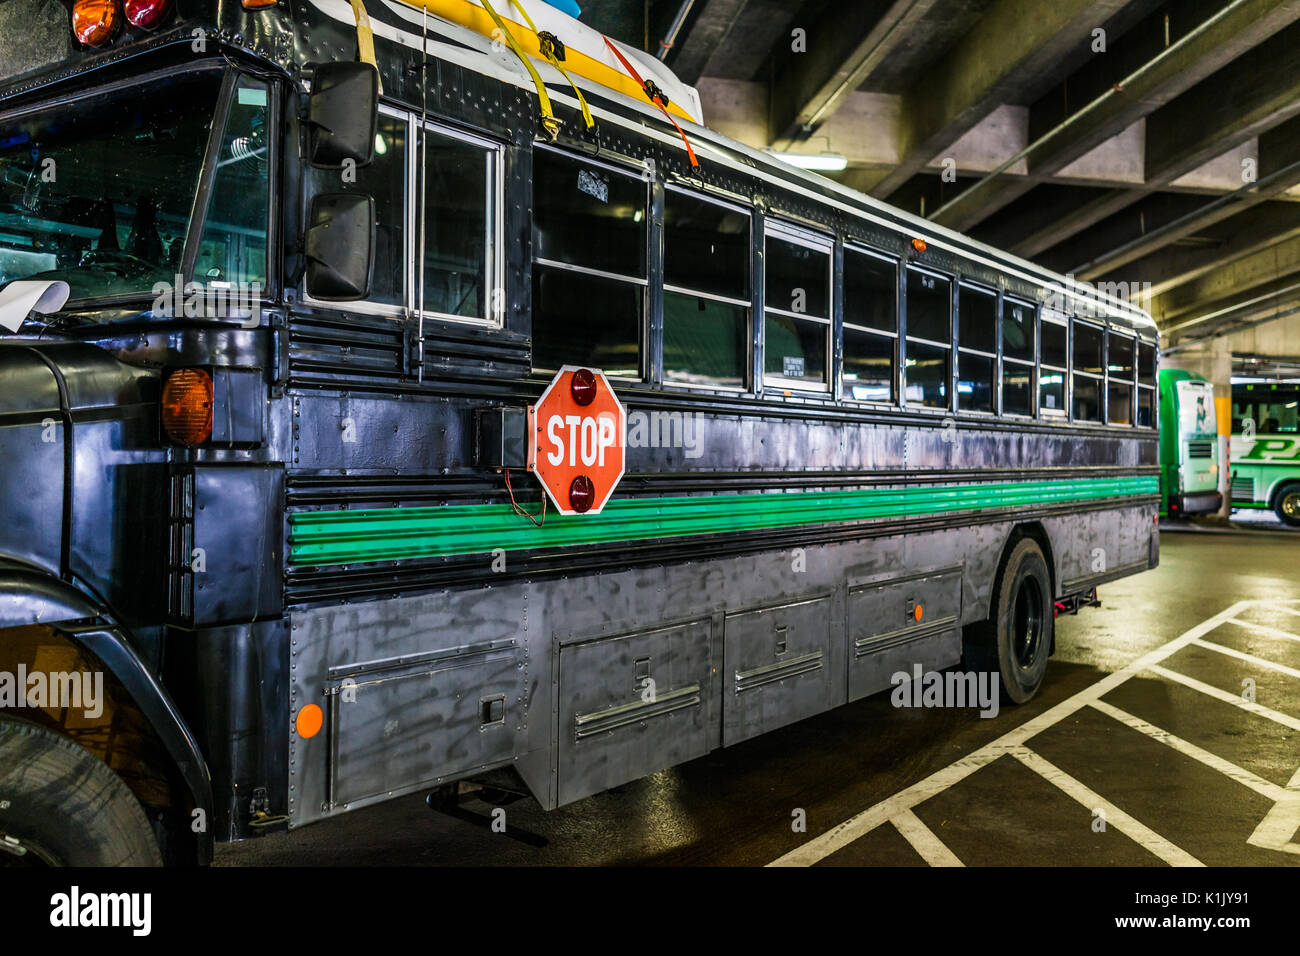 Washington DC, USA - July 1, 2017: Inside Union Station parking garage with black painted converted school bus Stock Photo